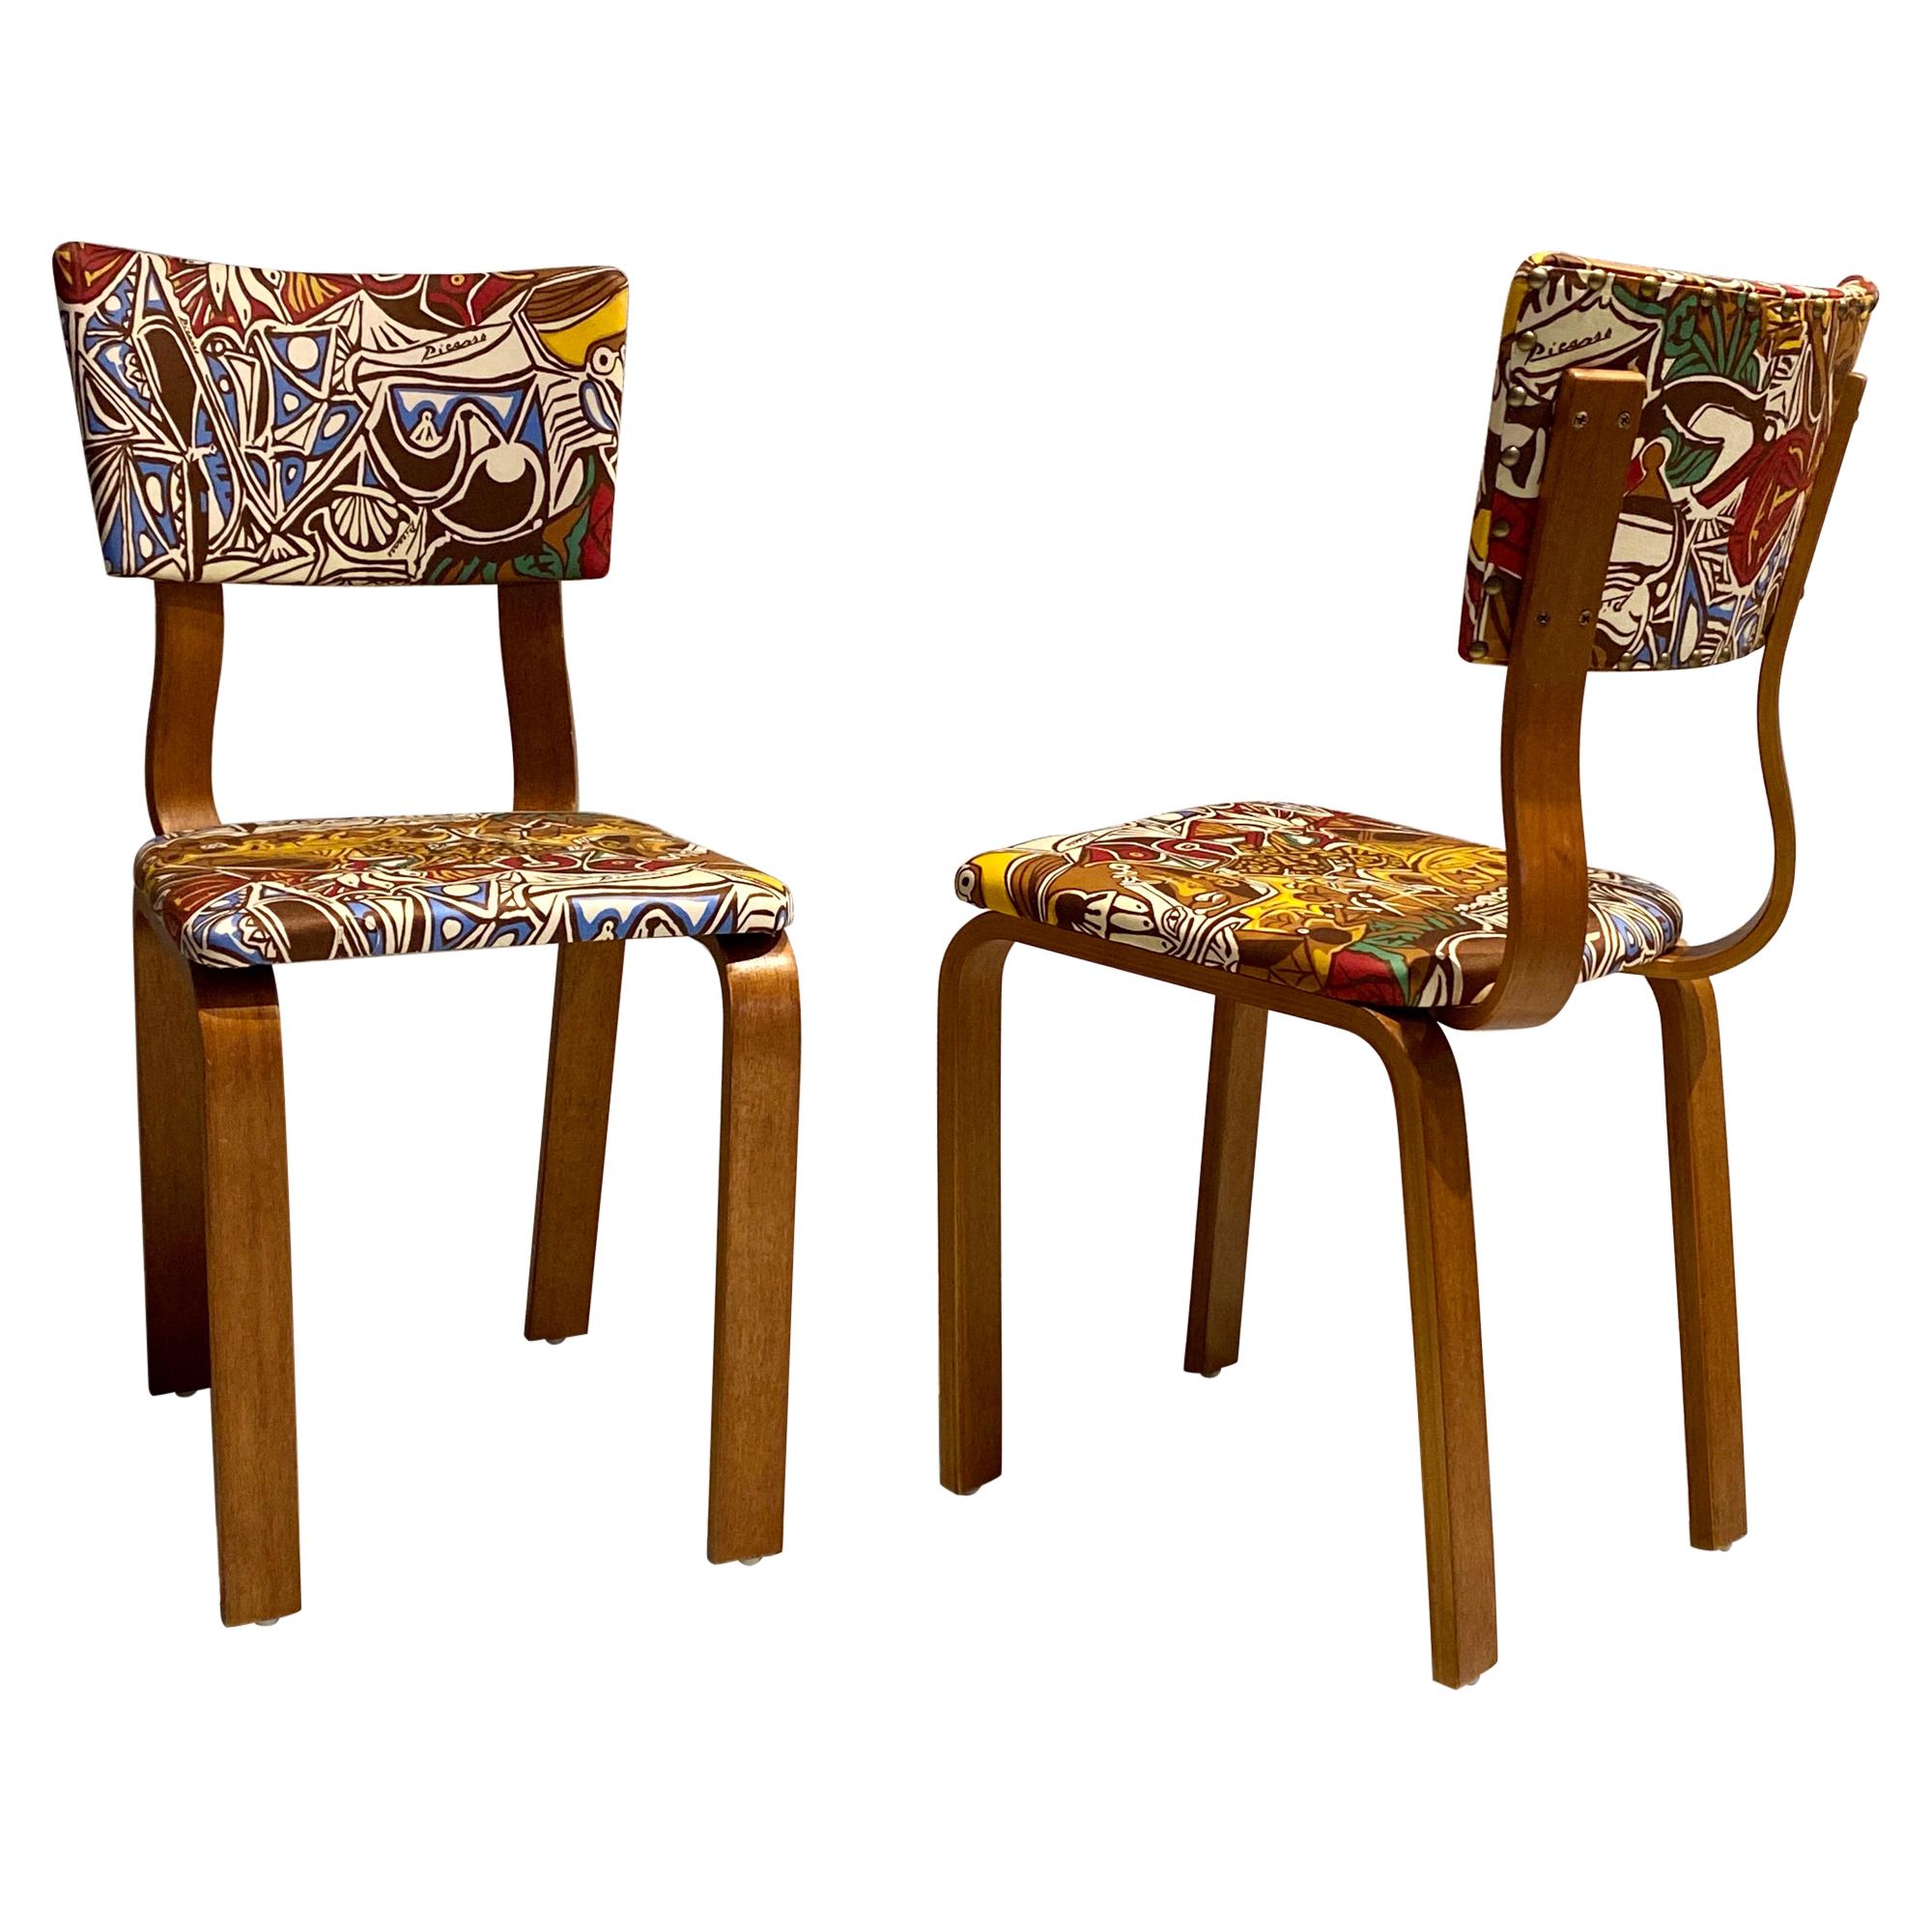 Midcentury Thonet Bentwood Side Chairs with Pablo Picasso LTD Edition Fabric For Sale